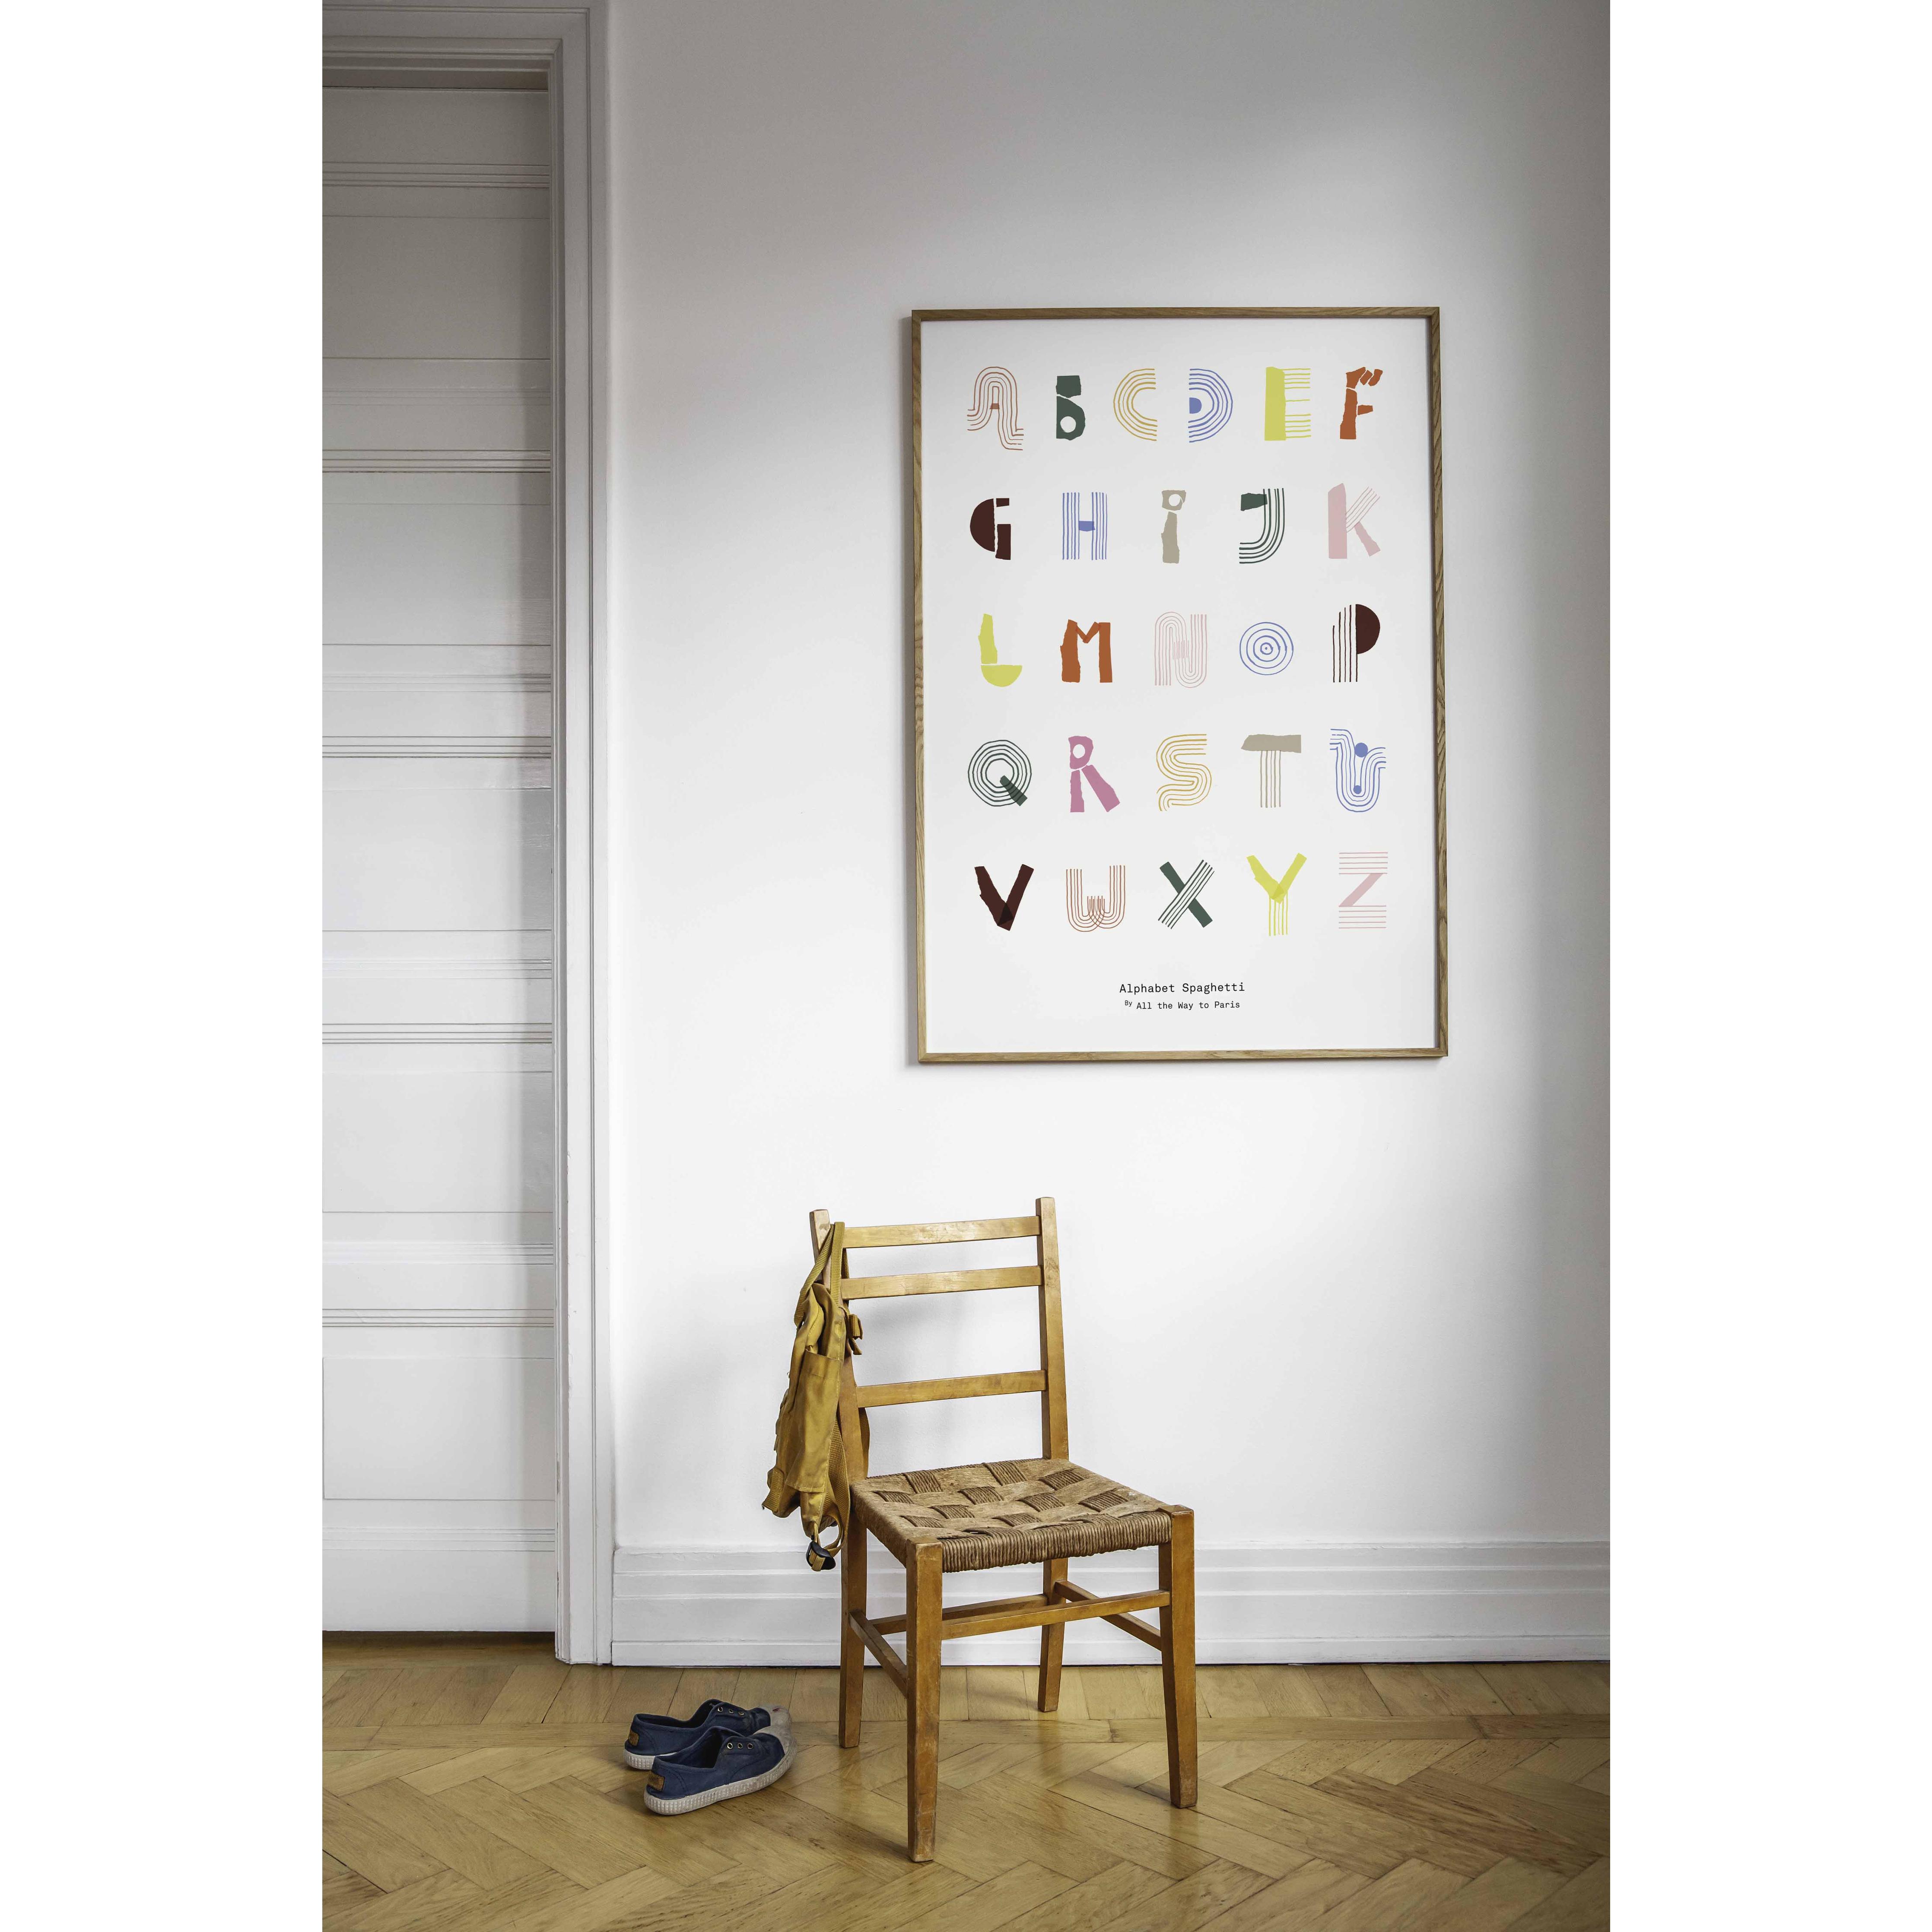 Paper Collective Alphabet Spaghetti Eng Poster 70x100 Cm, Multicolored